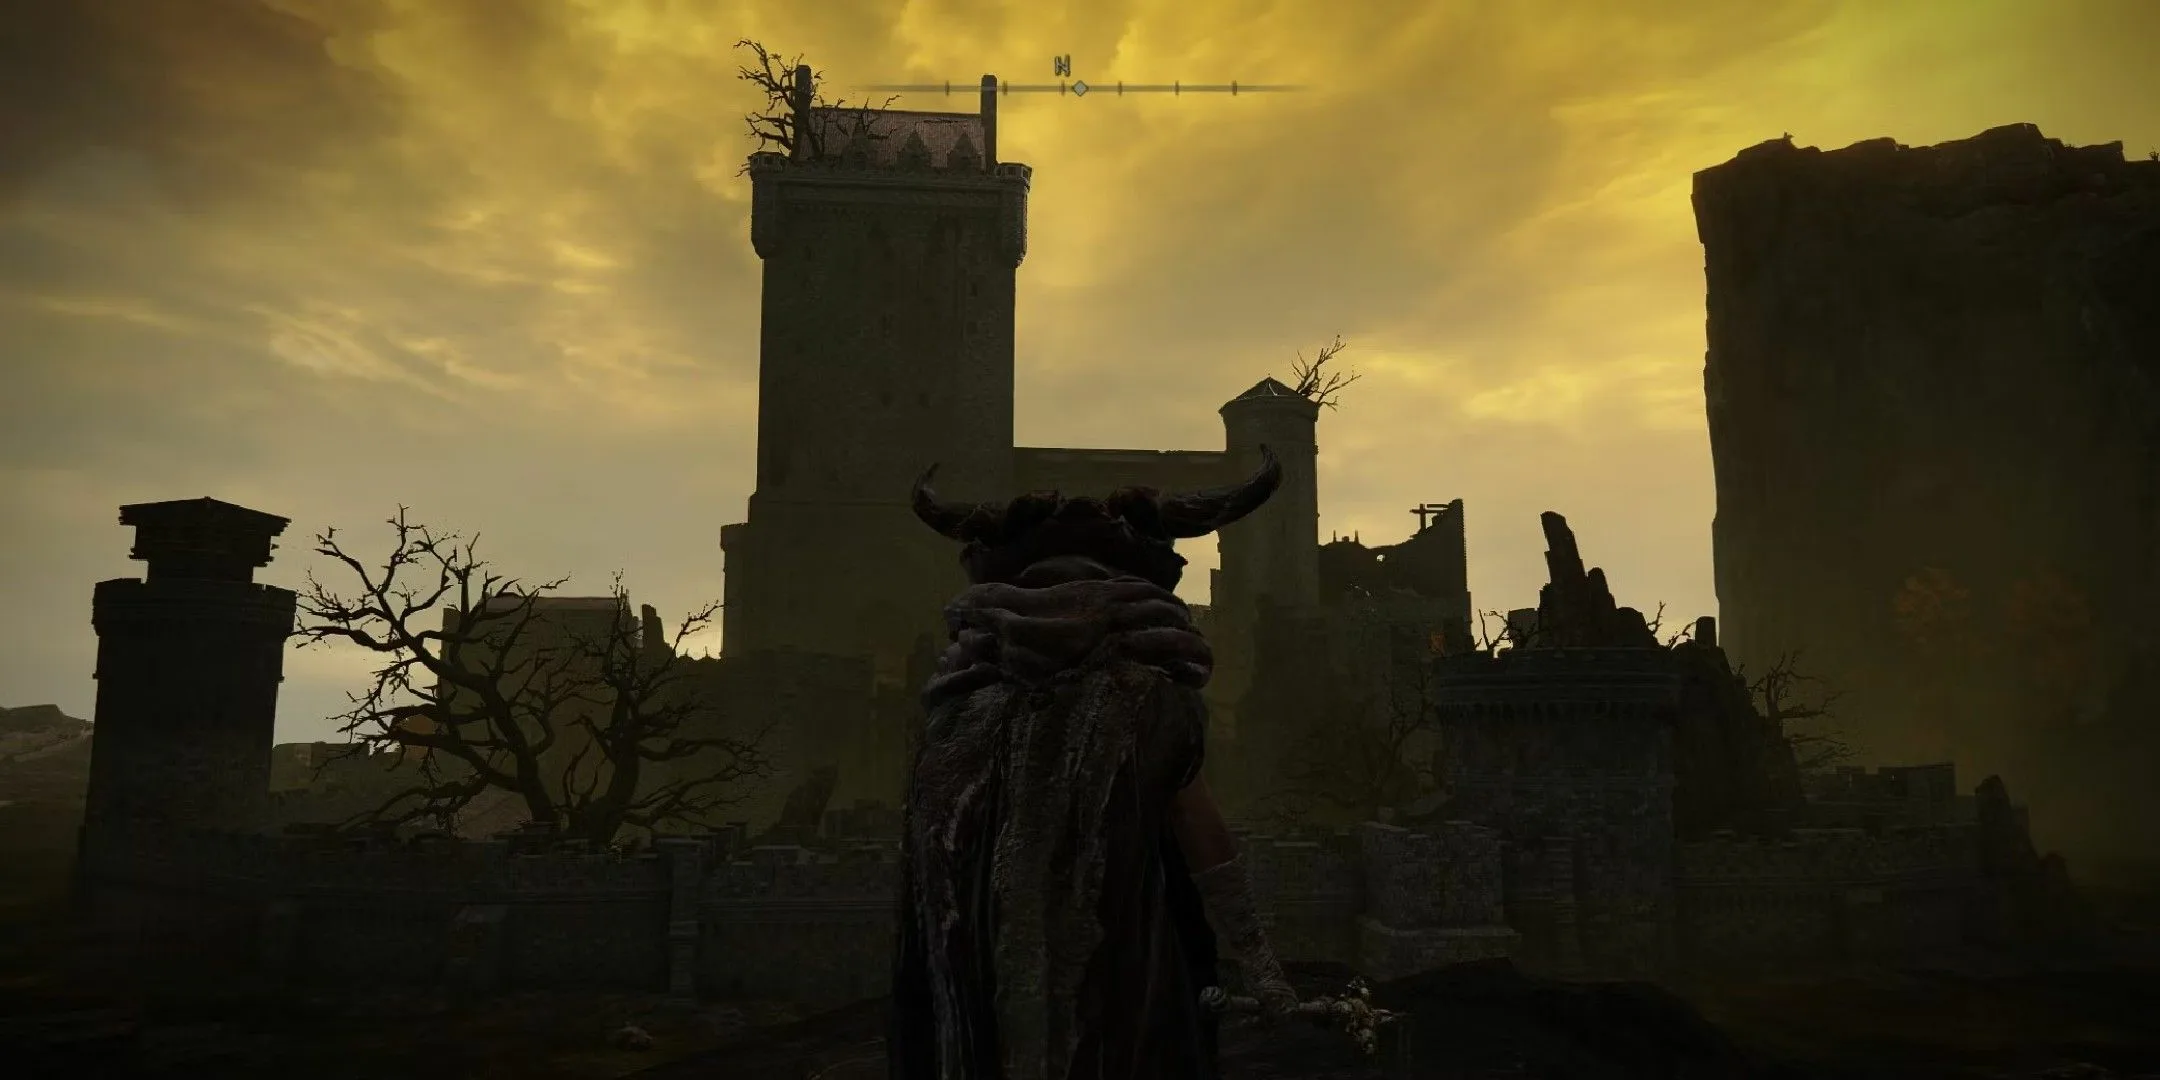 elden ring image showing a player in front of the shaded castle